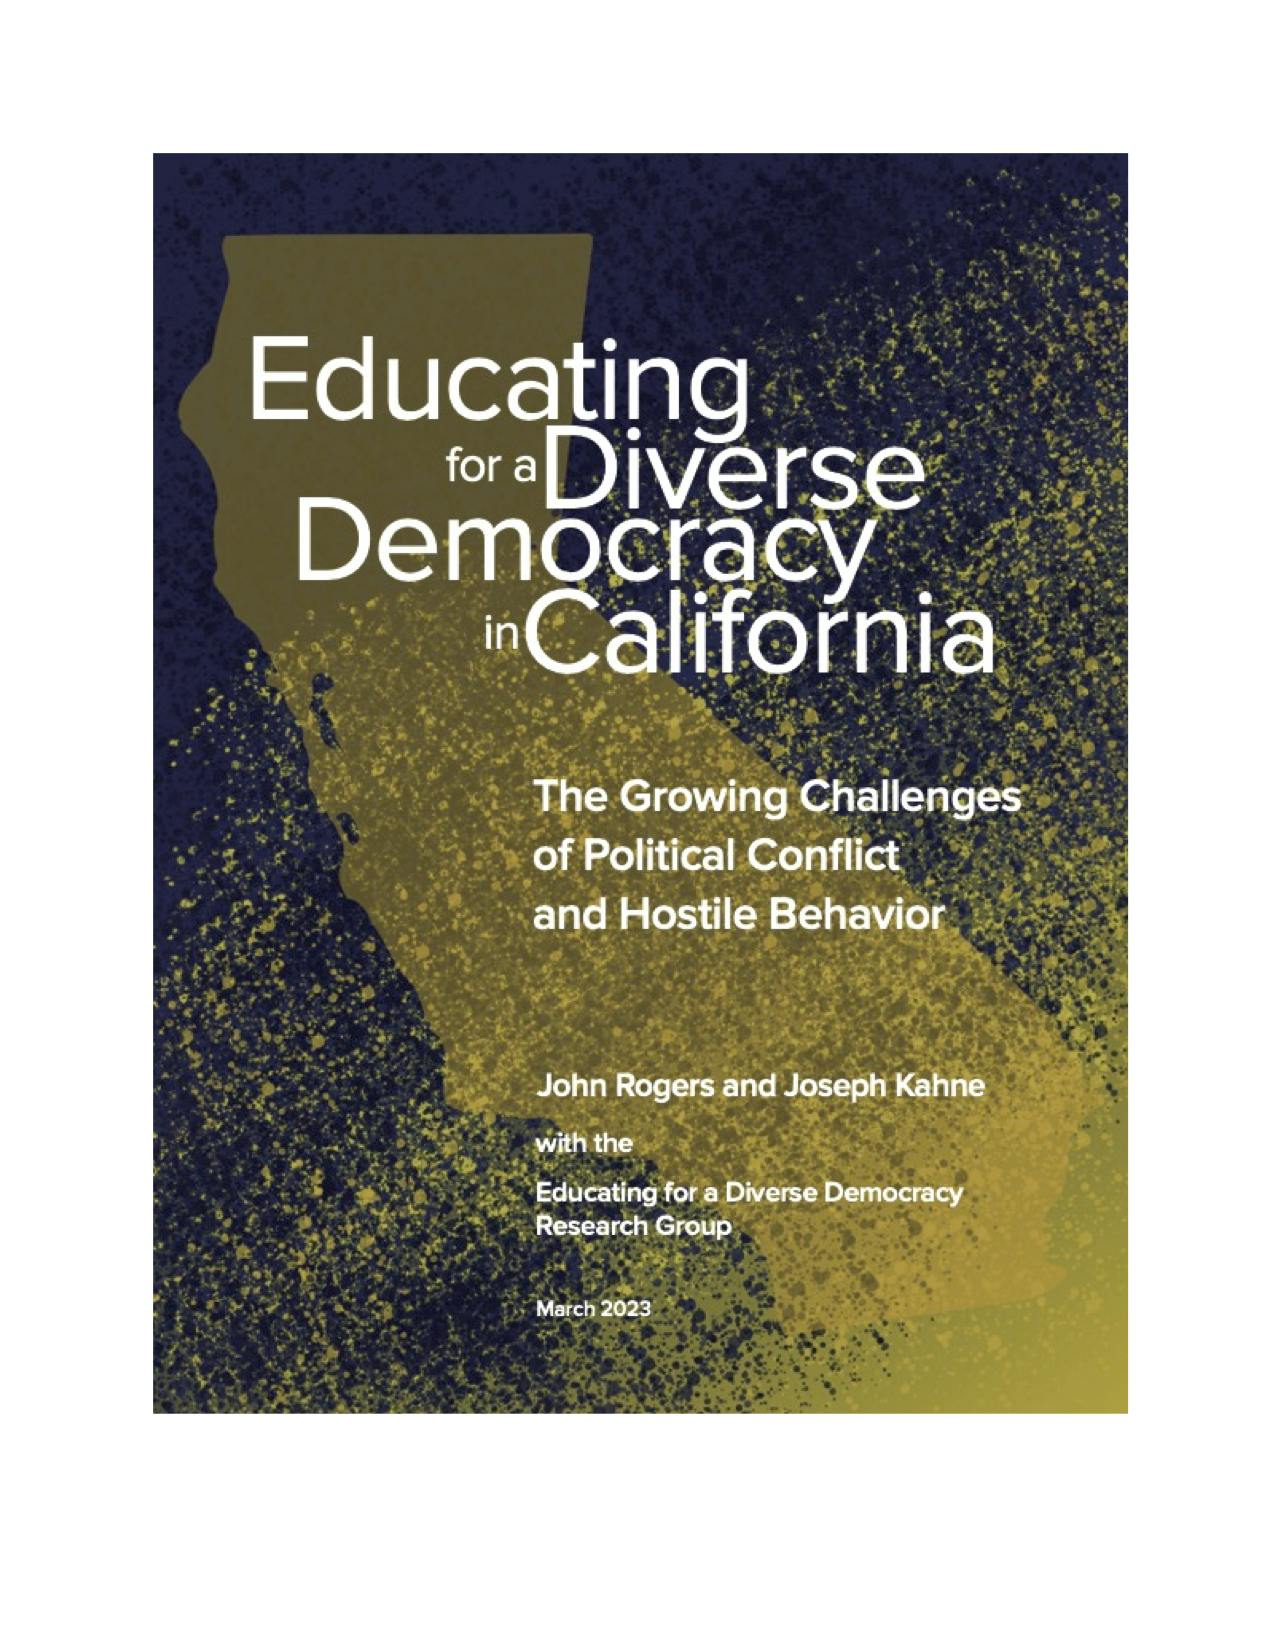 Educating for a Diverse Democracy in California